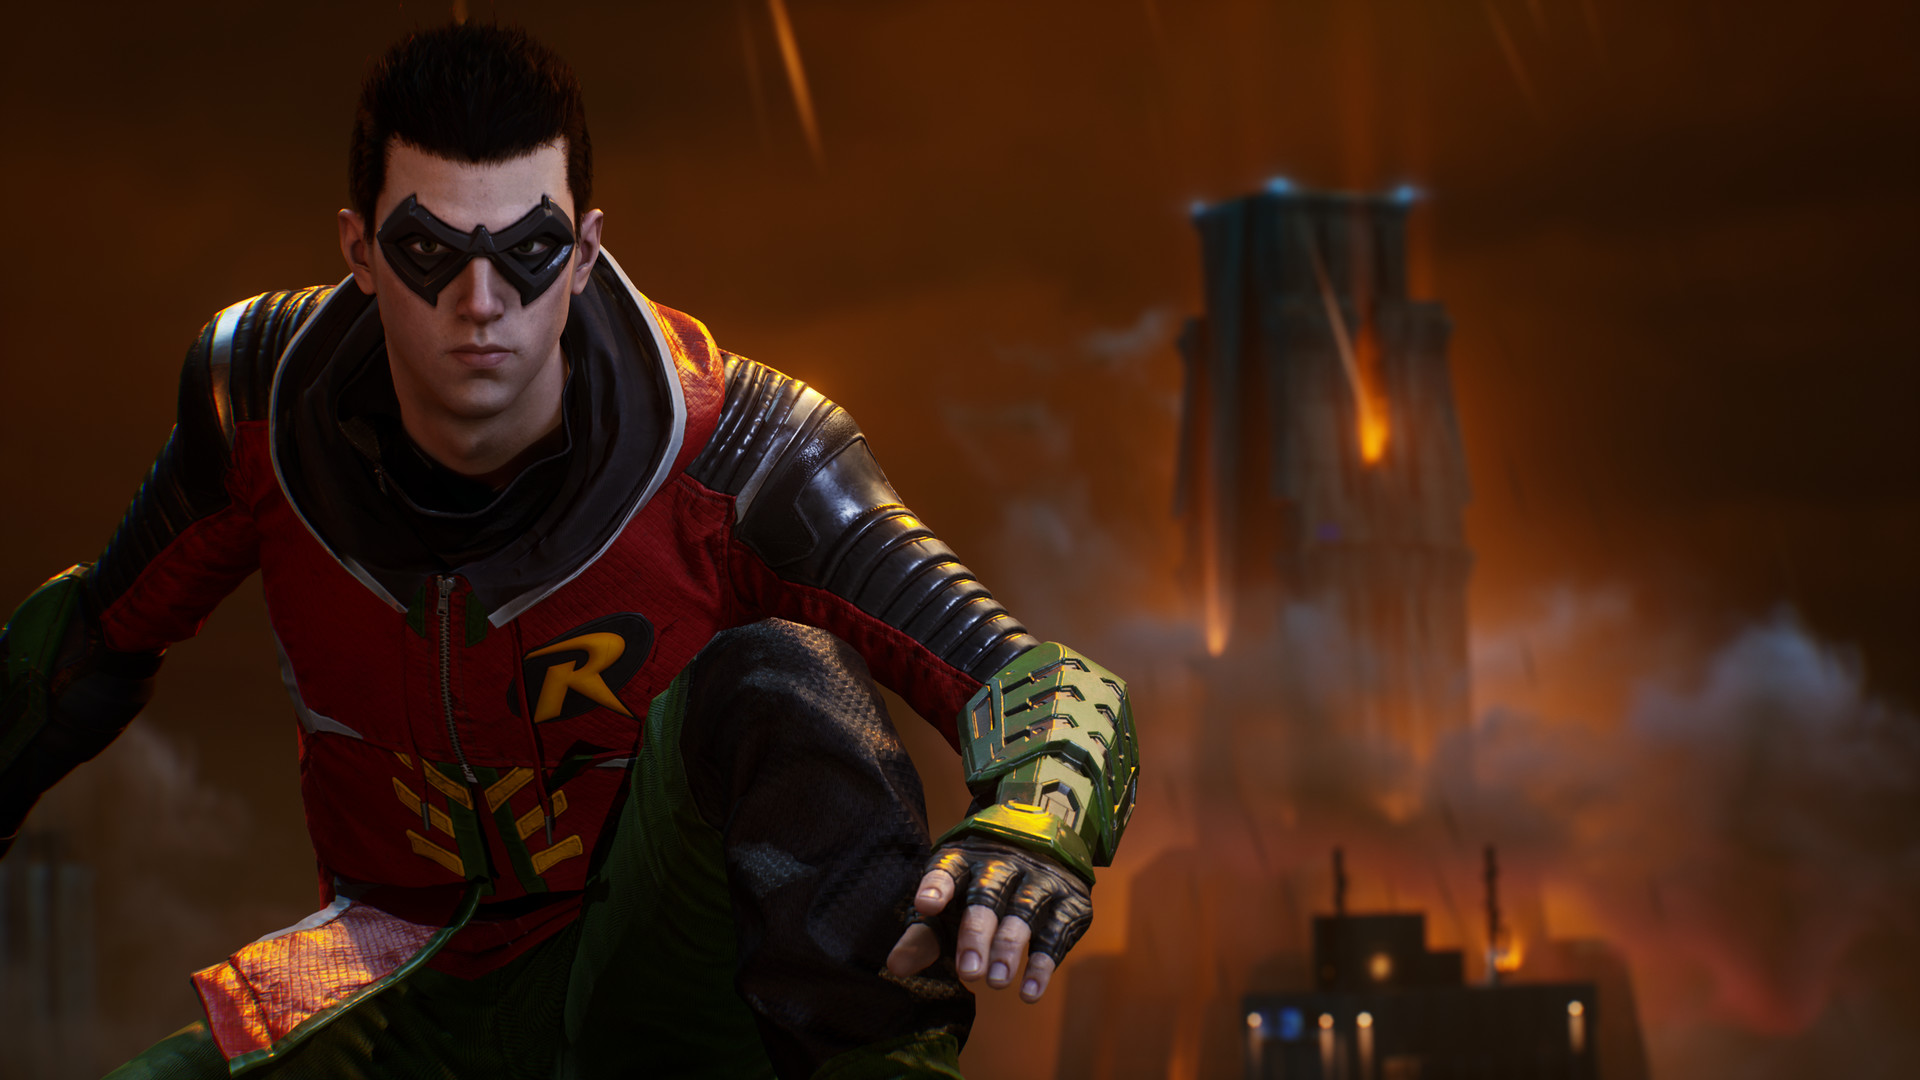 Gotham Knights system requirements